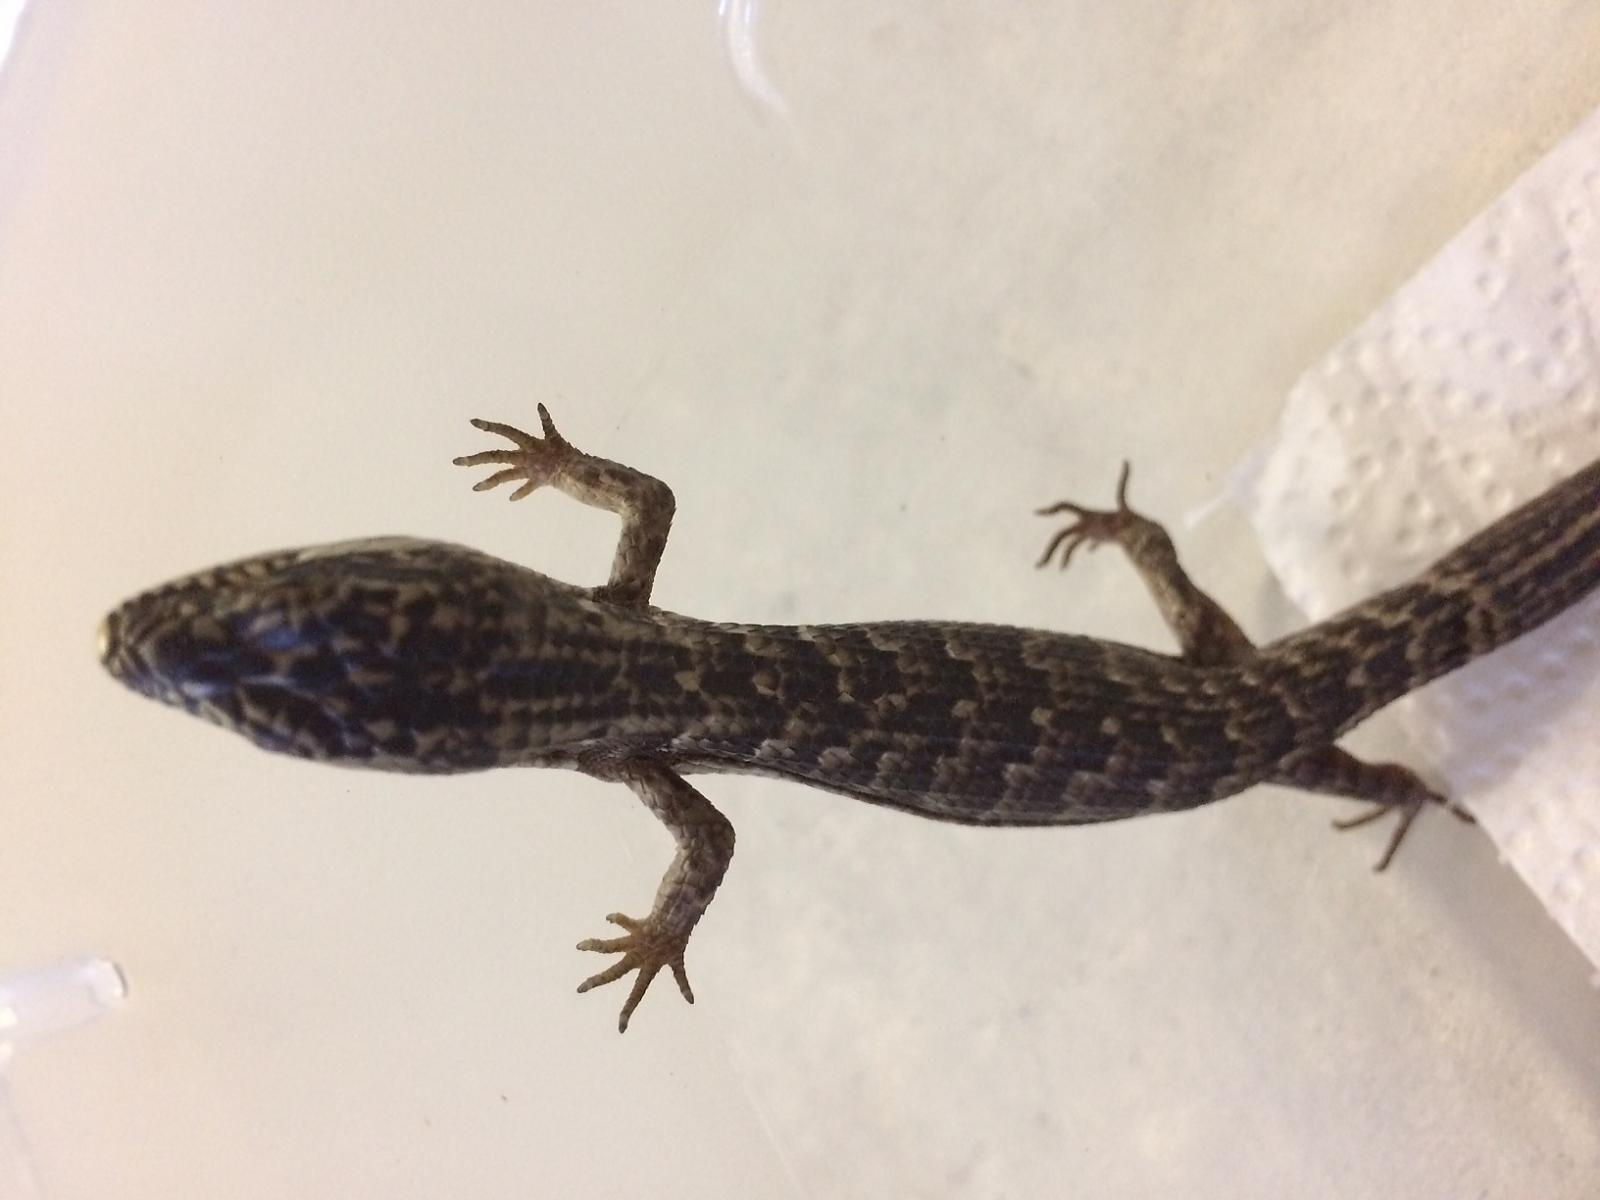 Possible Anerythristic Southern Alligator Lizard